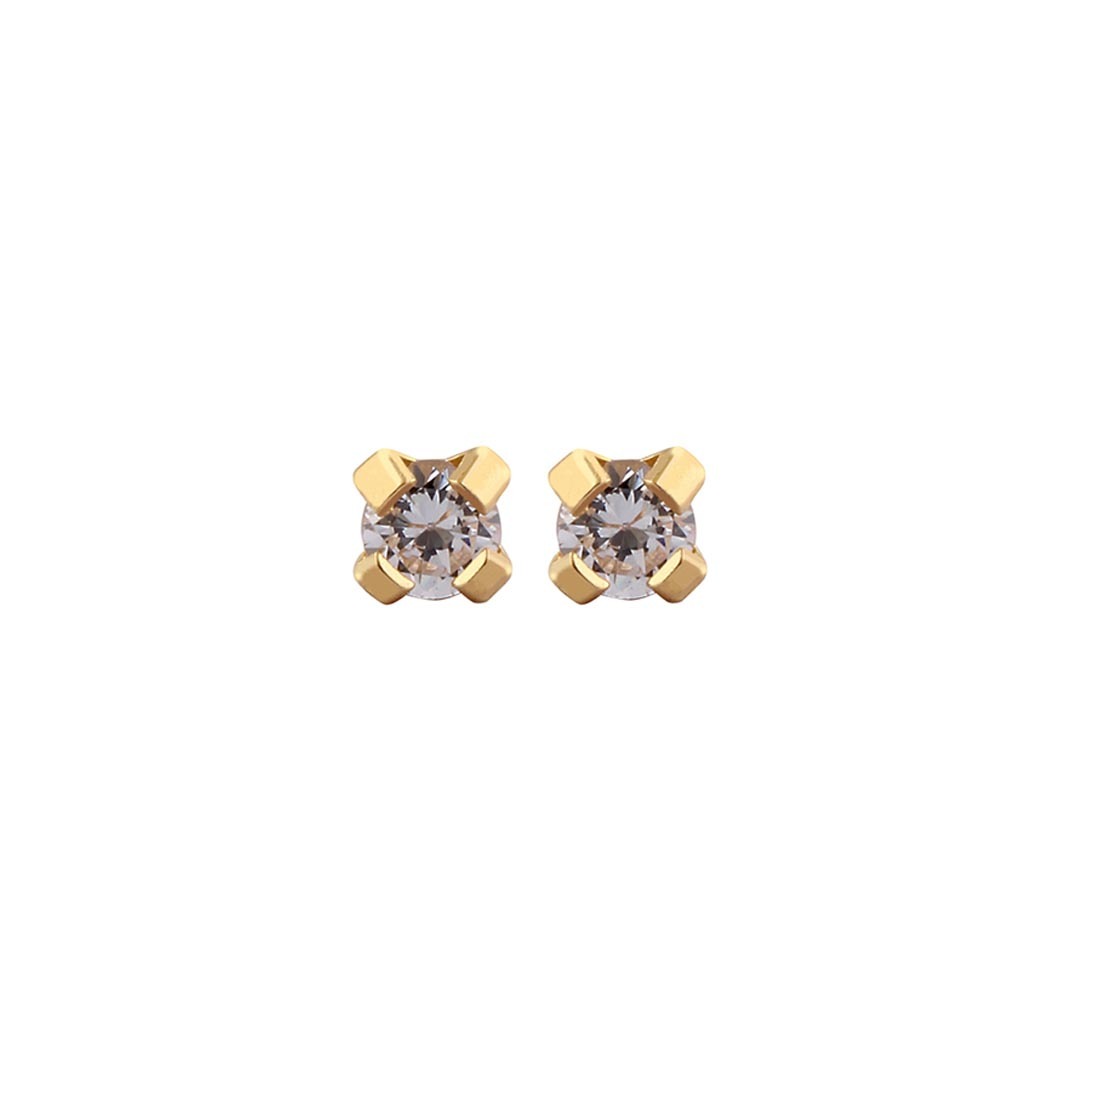 2MM - Cubic Zirconia (Round) – Crystal Clear | 24K Gold Plated Kids / Baby / Children’s Fashion Earrings | Studex Tiny Tips